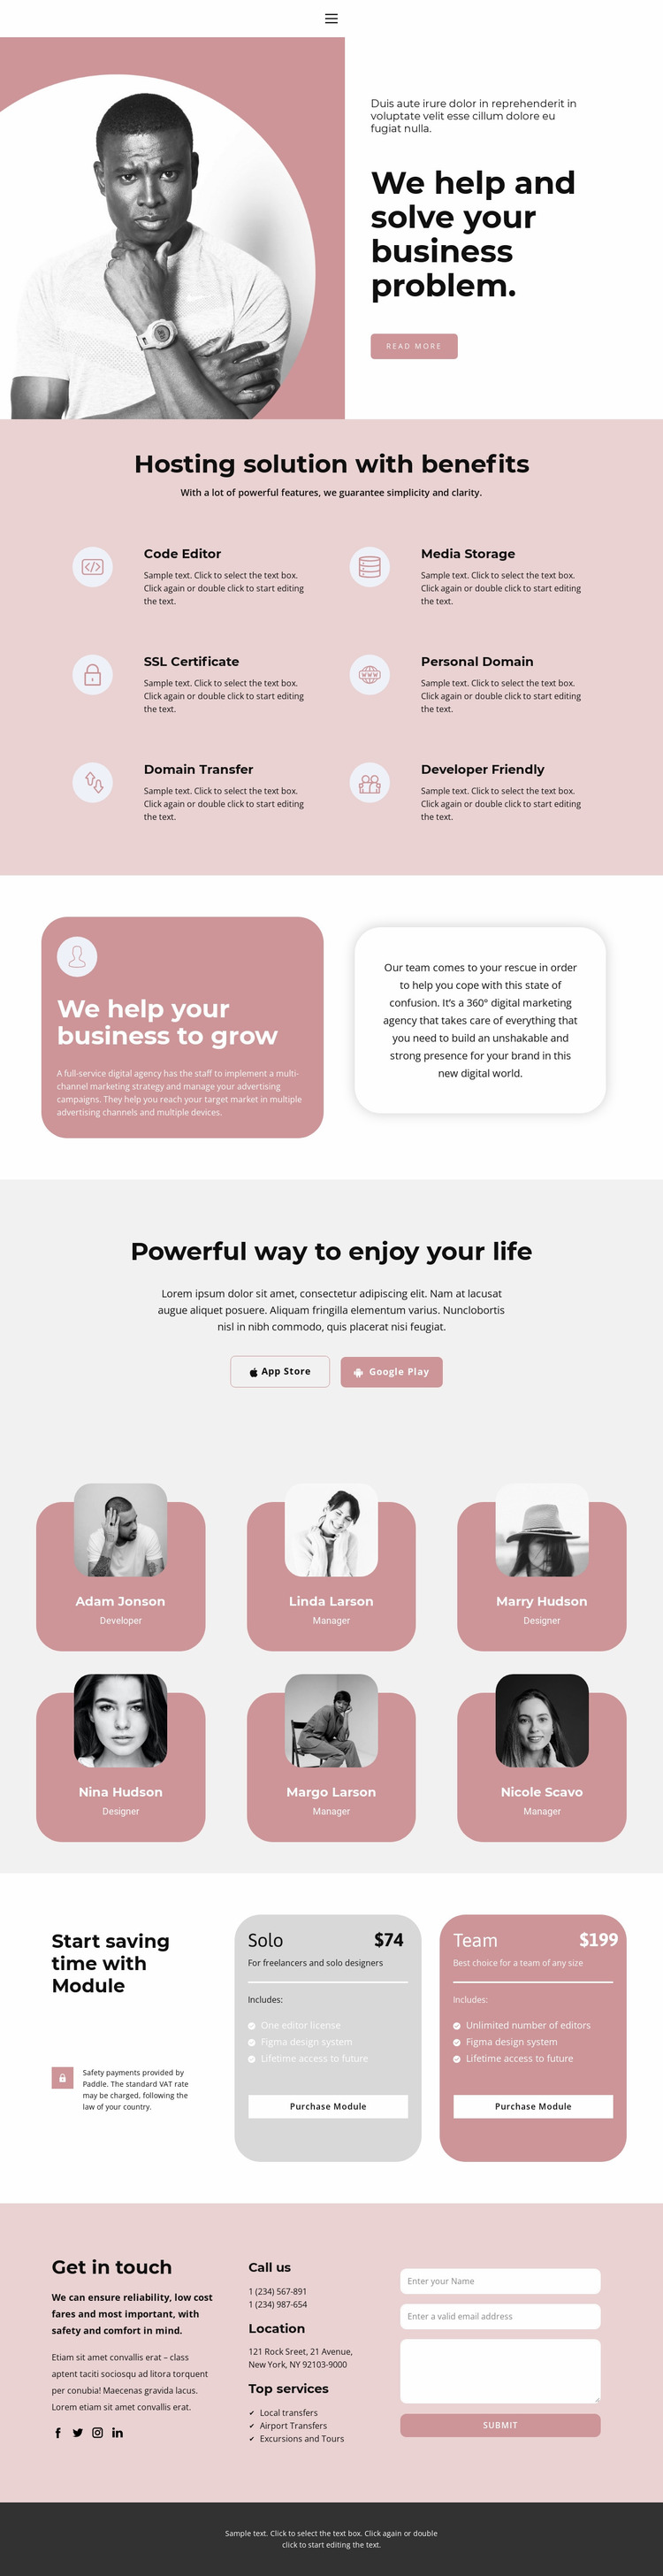 Problem solving is our choice Website Mockup